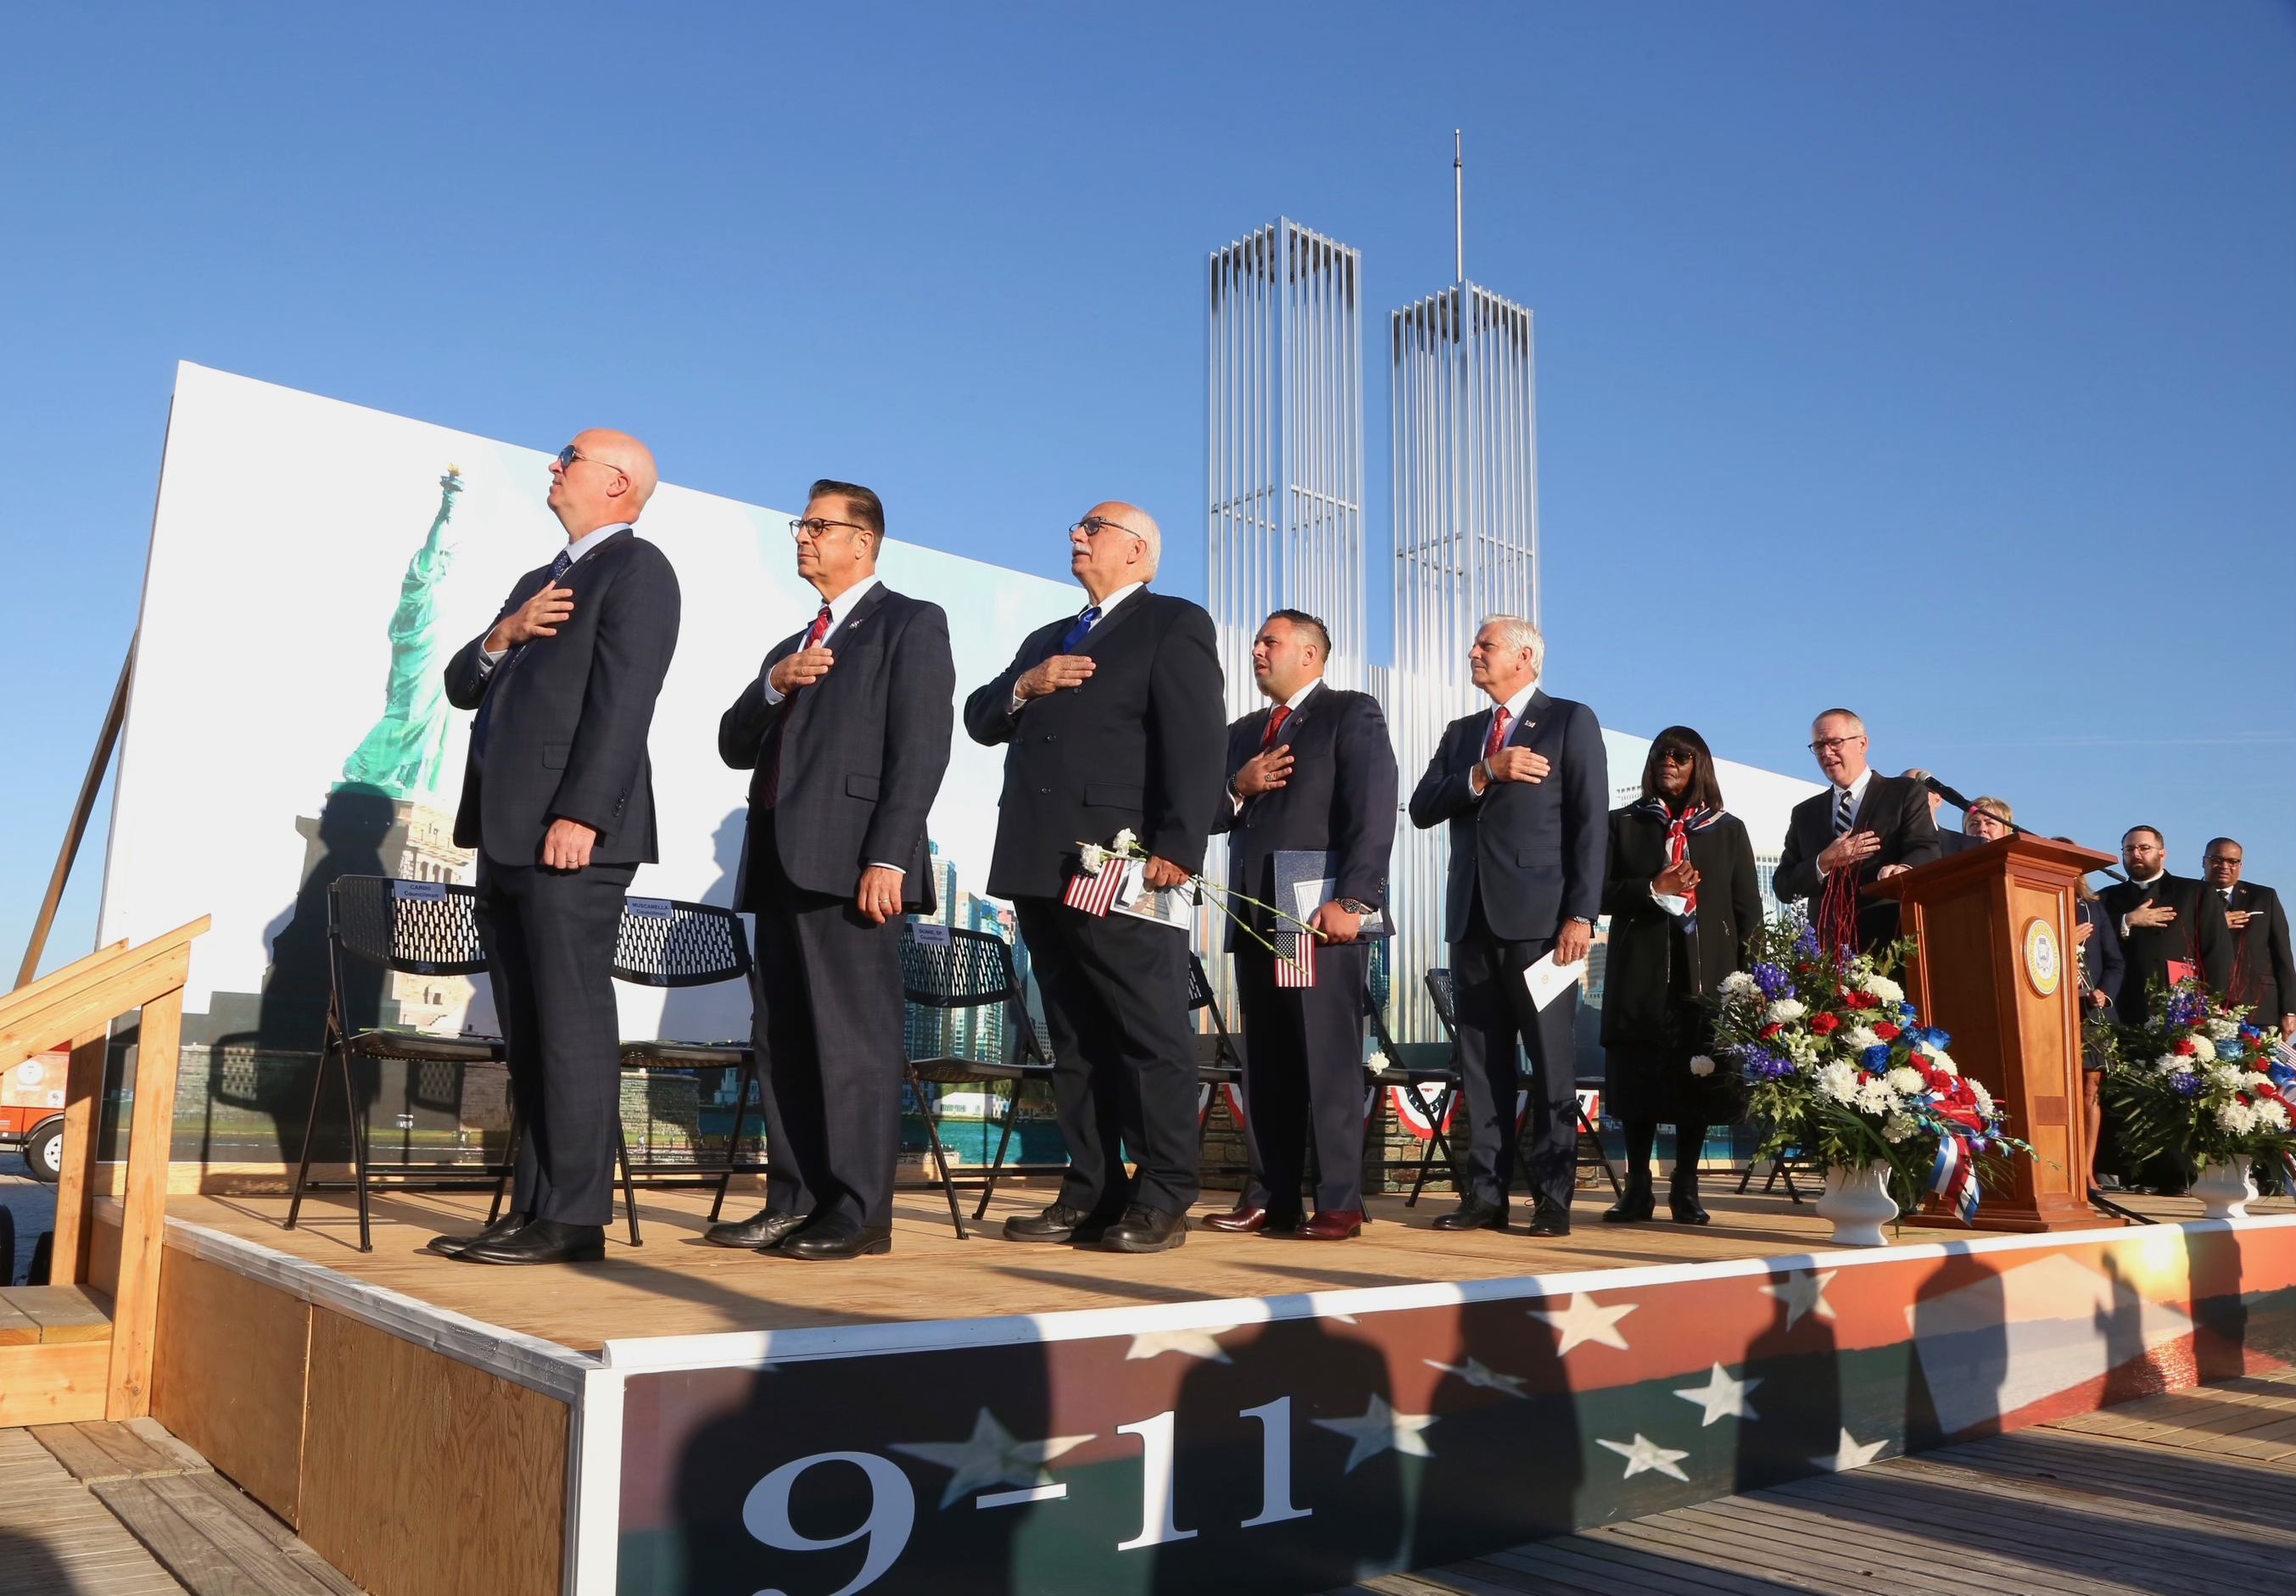 Town of Hempstead Hosts Emotional 9/11 20th Anniversary Sunrise Service on Beach at Point Lookout